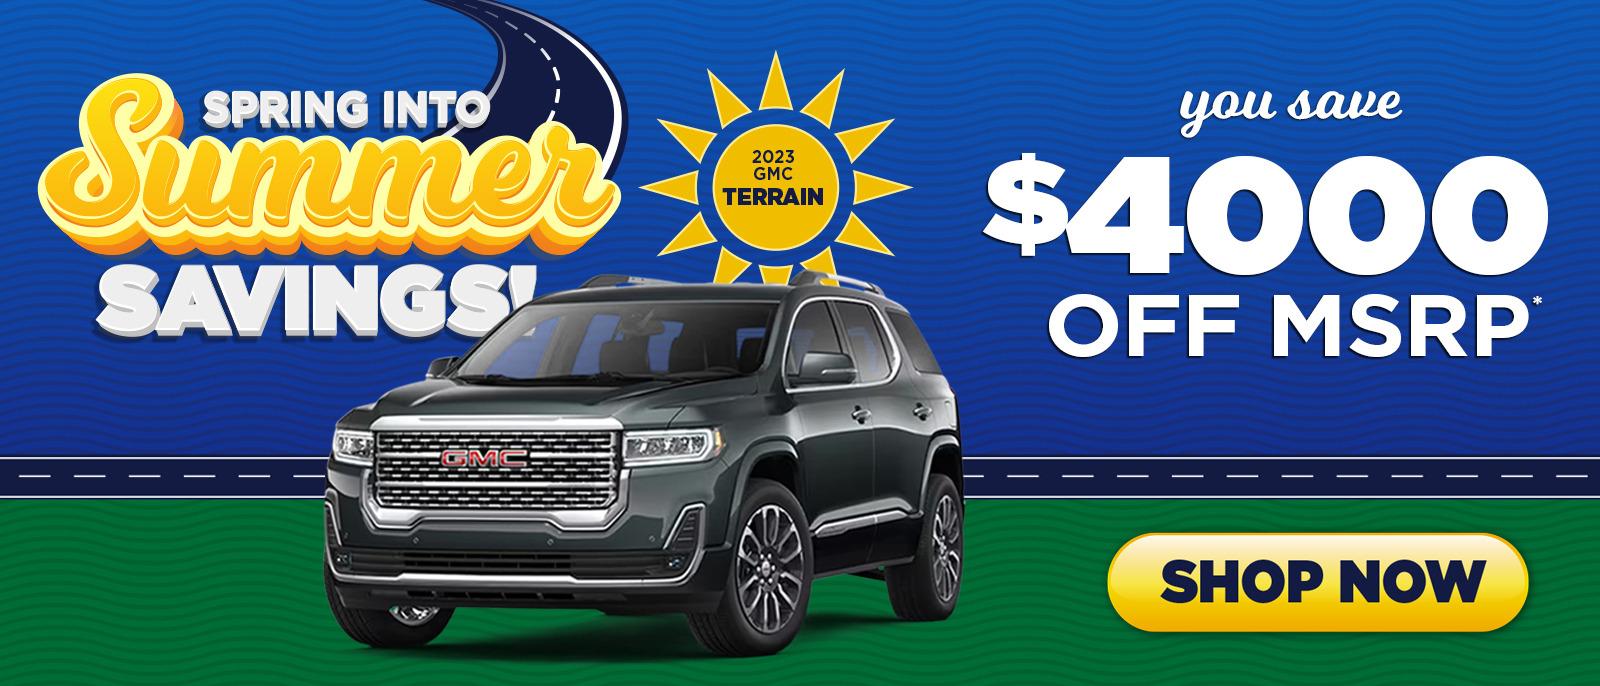 2023 GMC Terrain - You Save $4000 Off MSRP